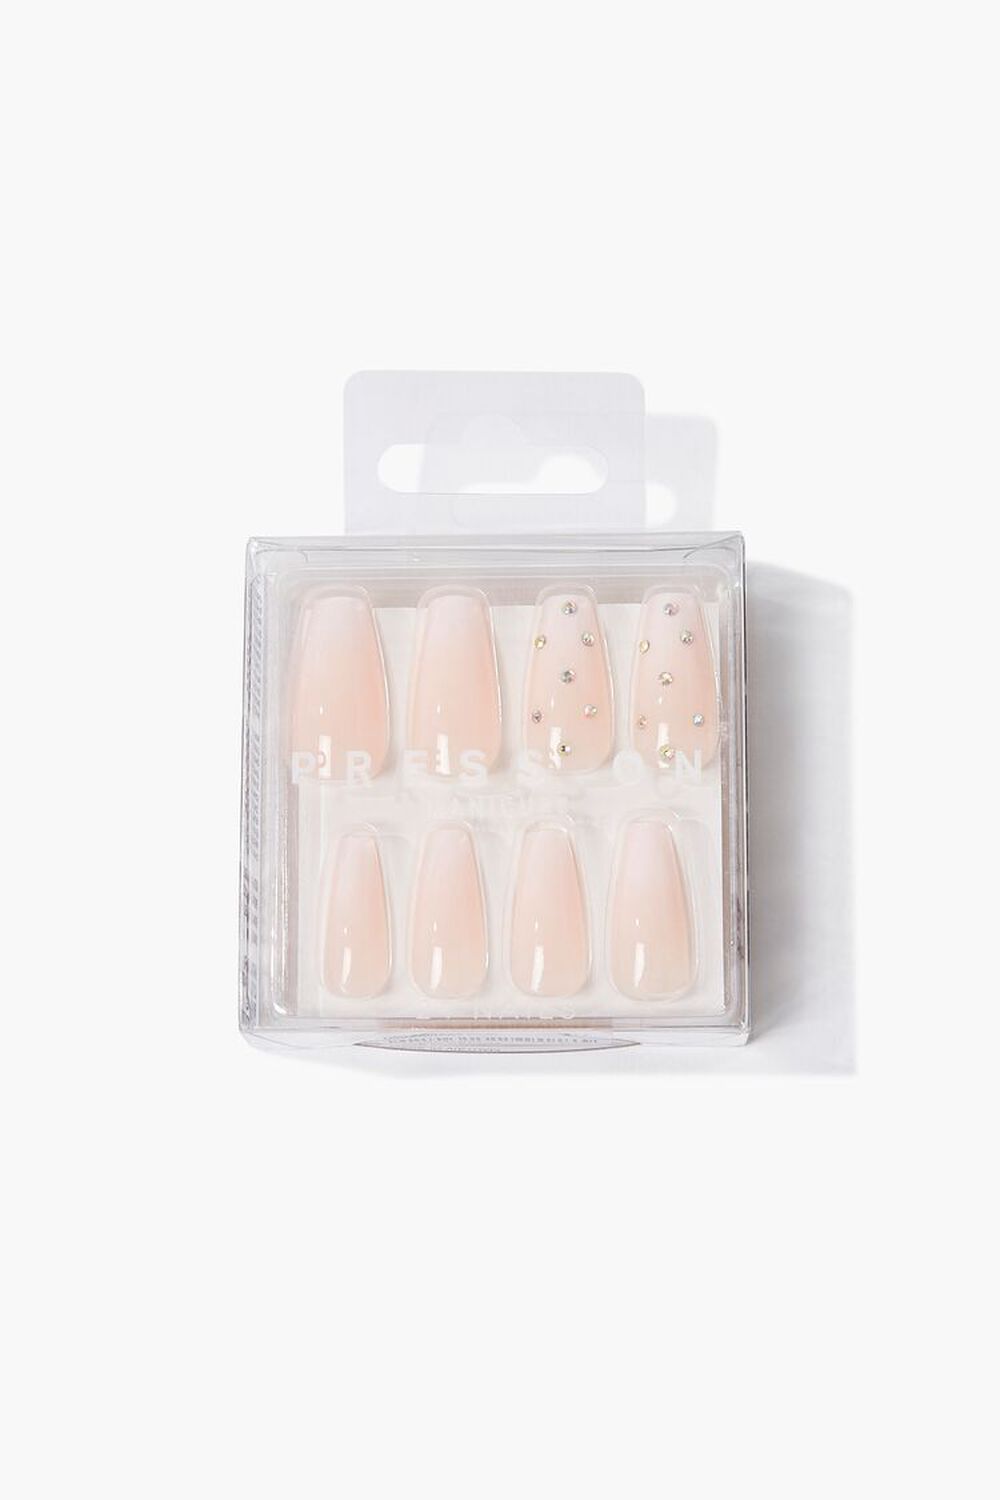 NUDE/MULTI Faux Gem Press-On Nails, image 1